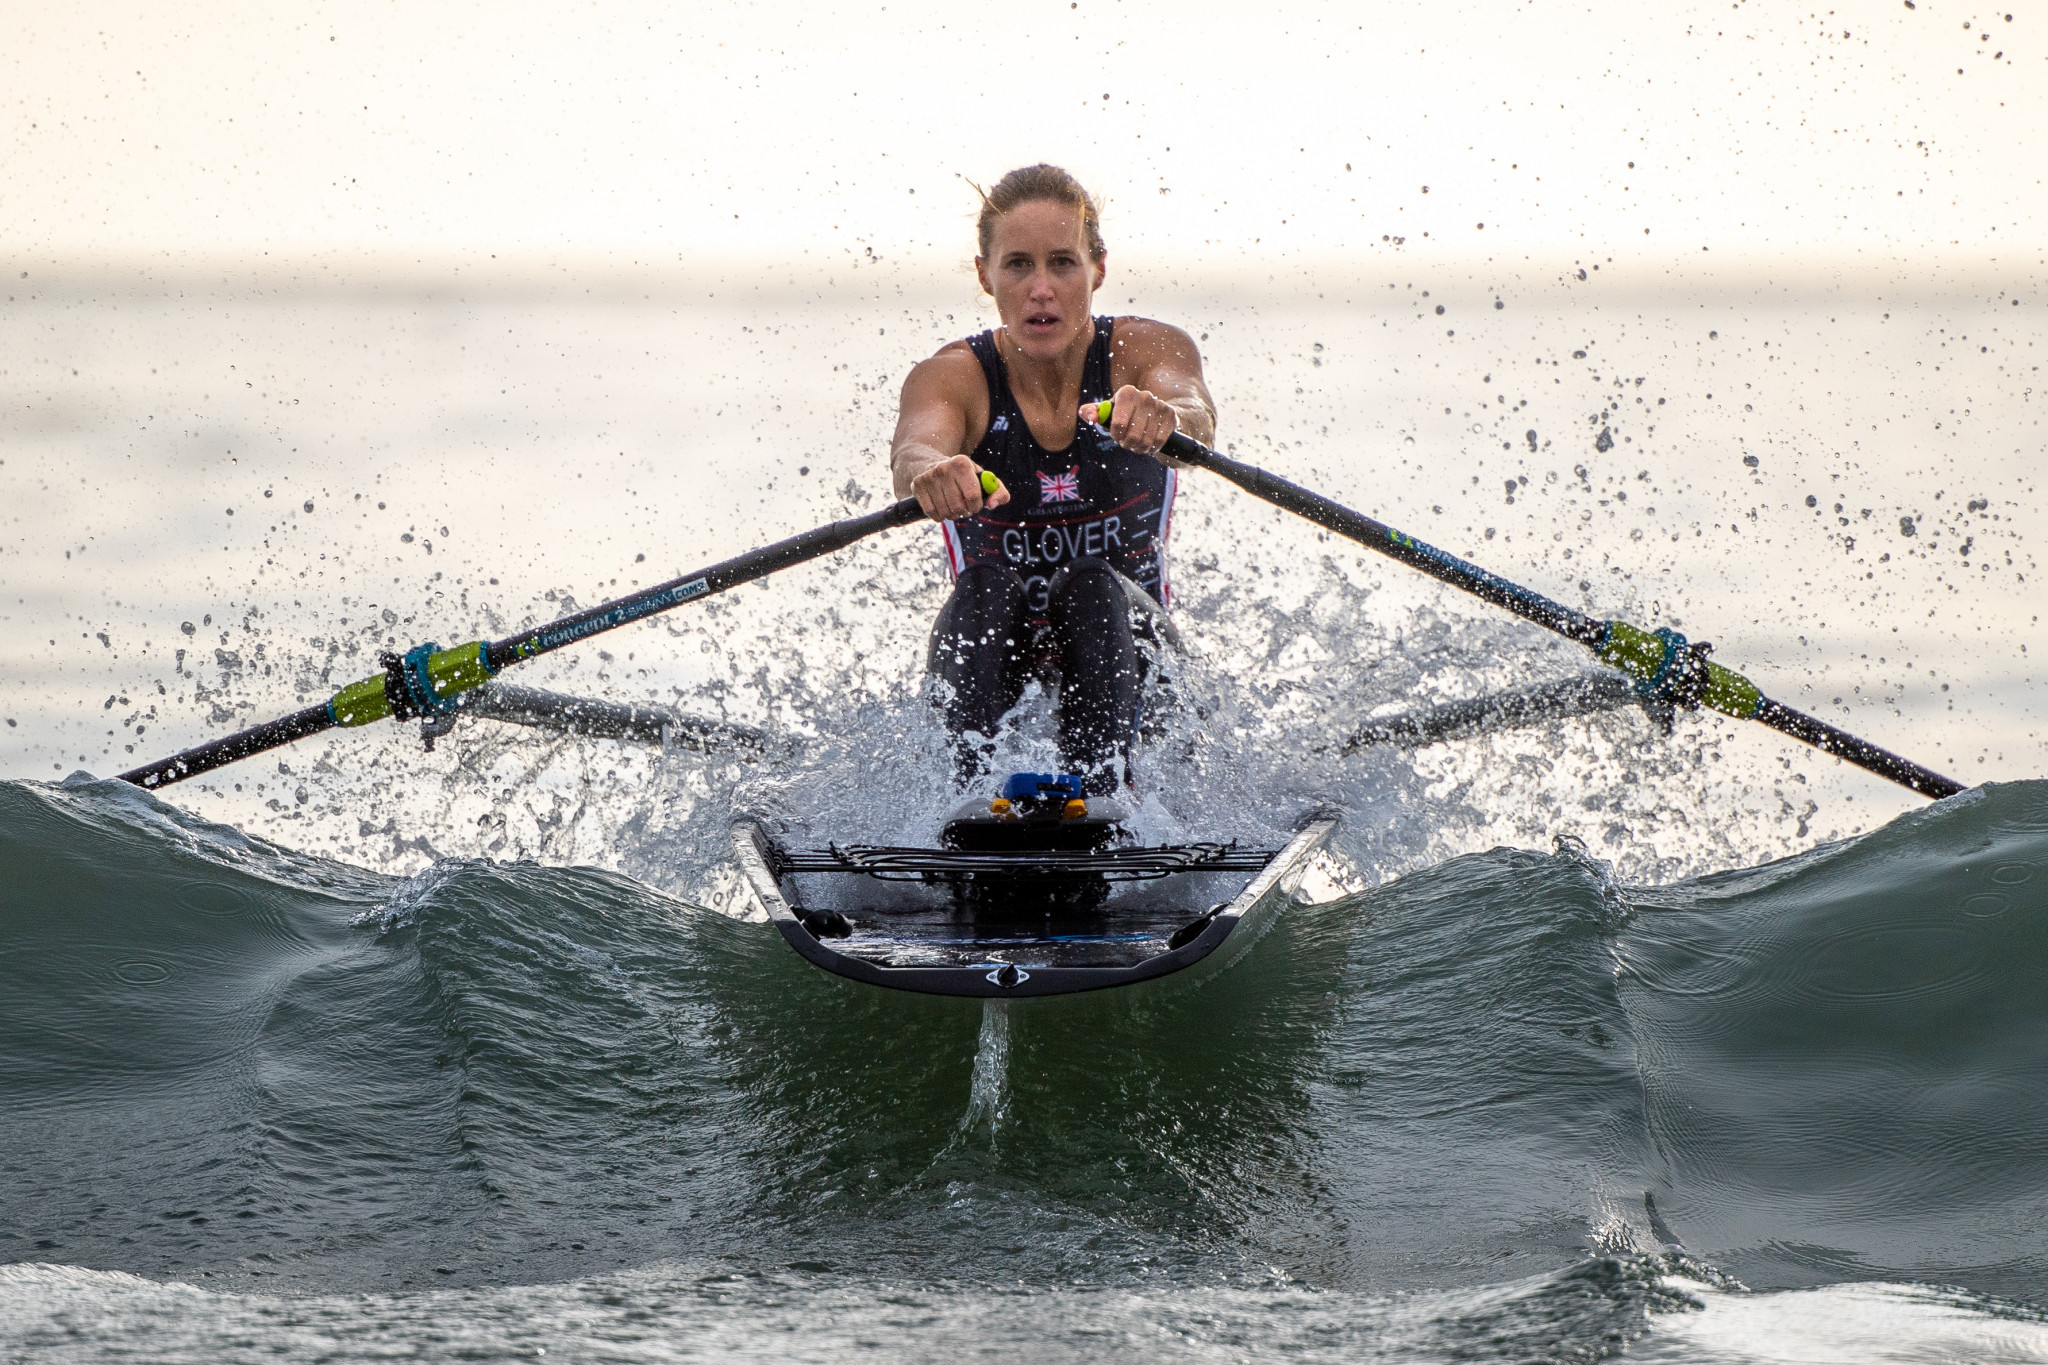 Helen Glover in action at the World Rowing Beach Sprint Championships in Saundersfoot ©Benedict Tufnell/British Rowing